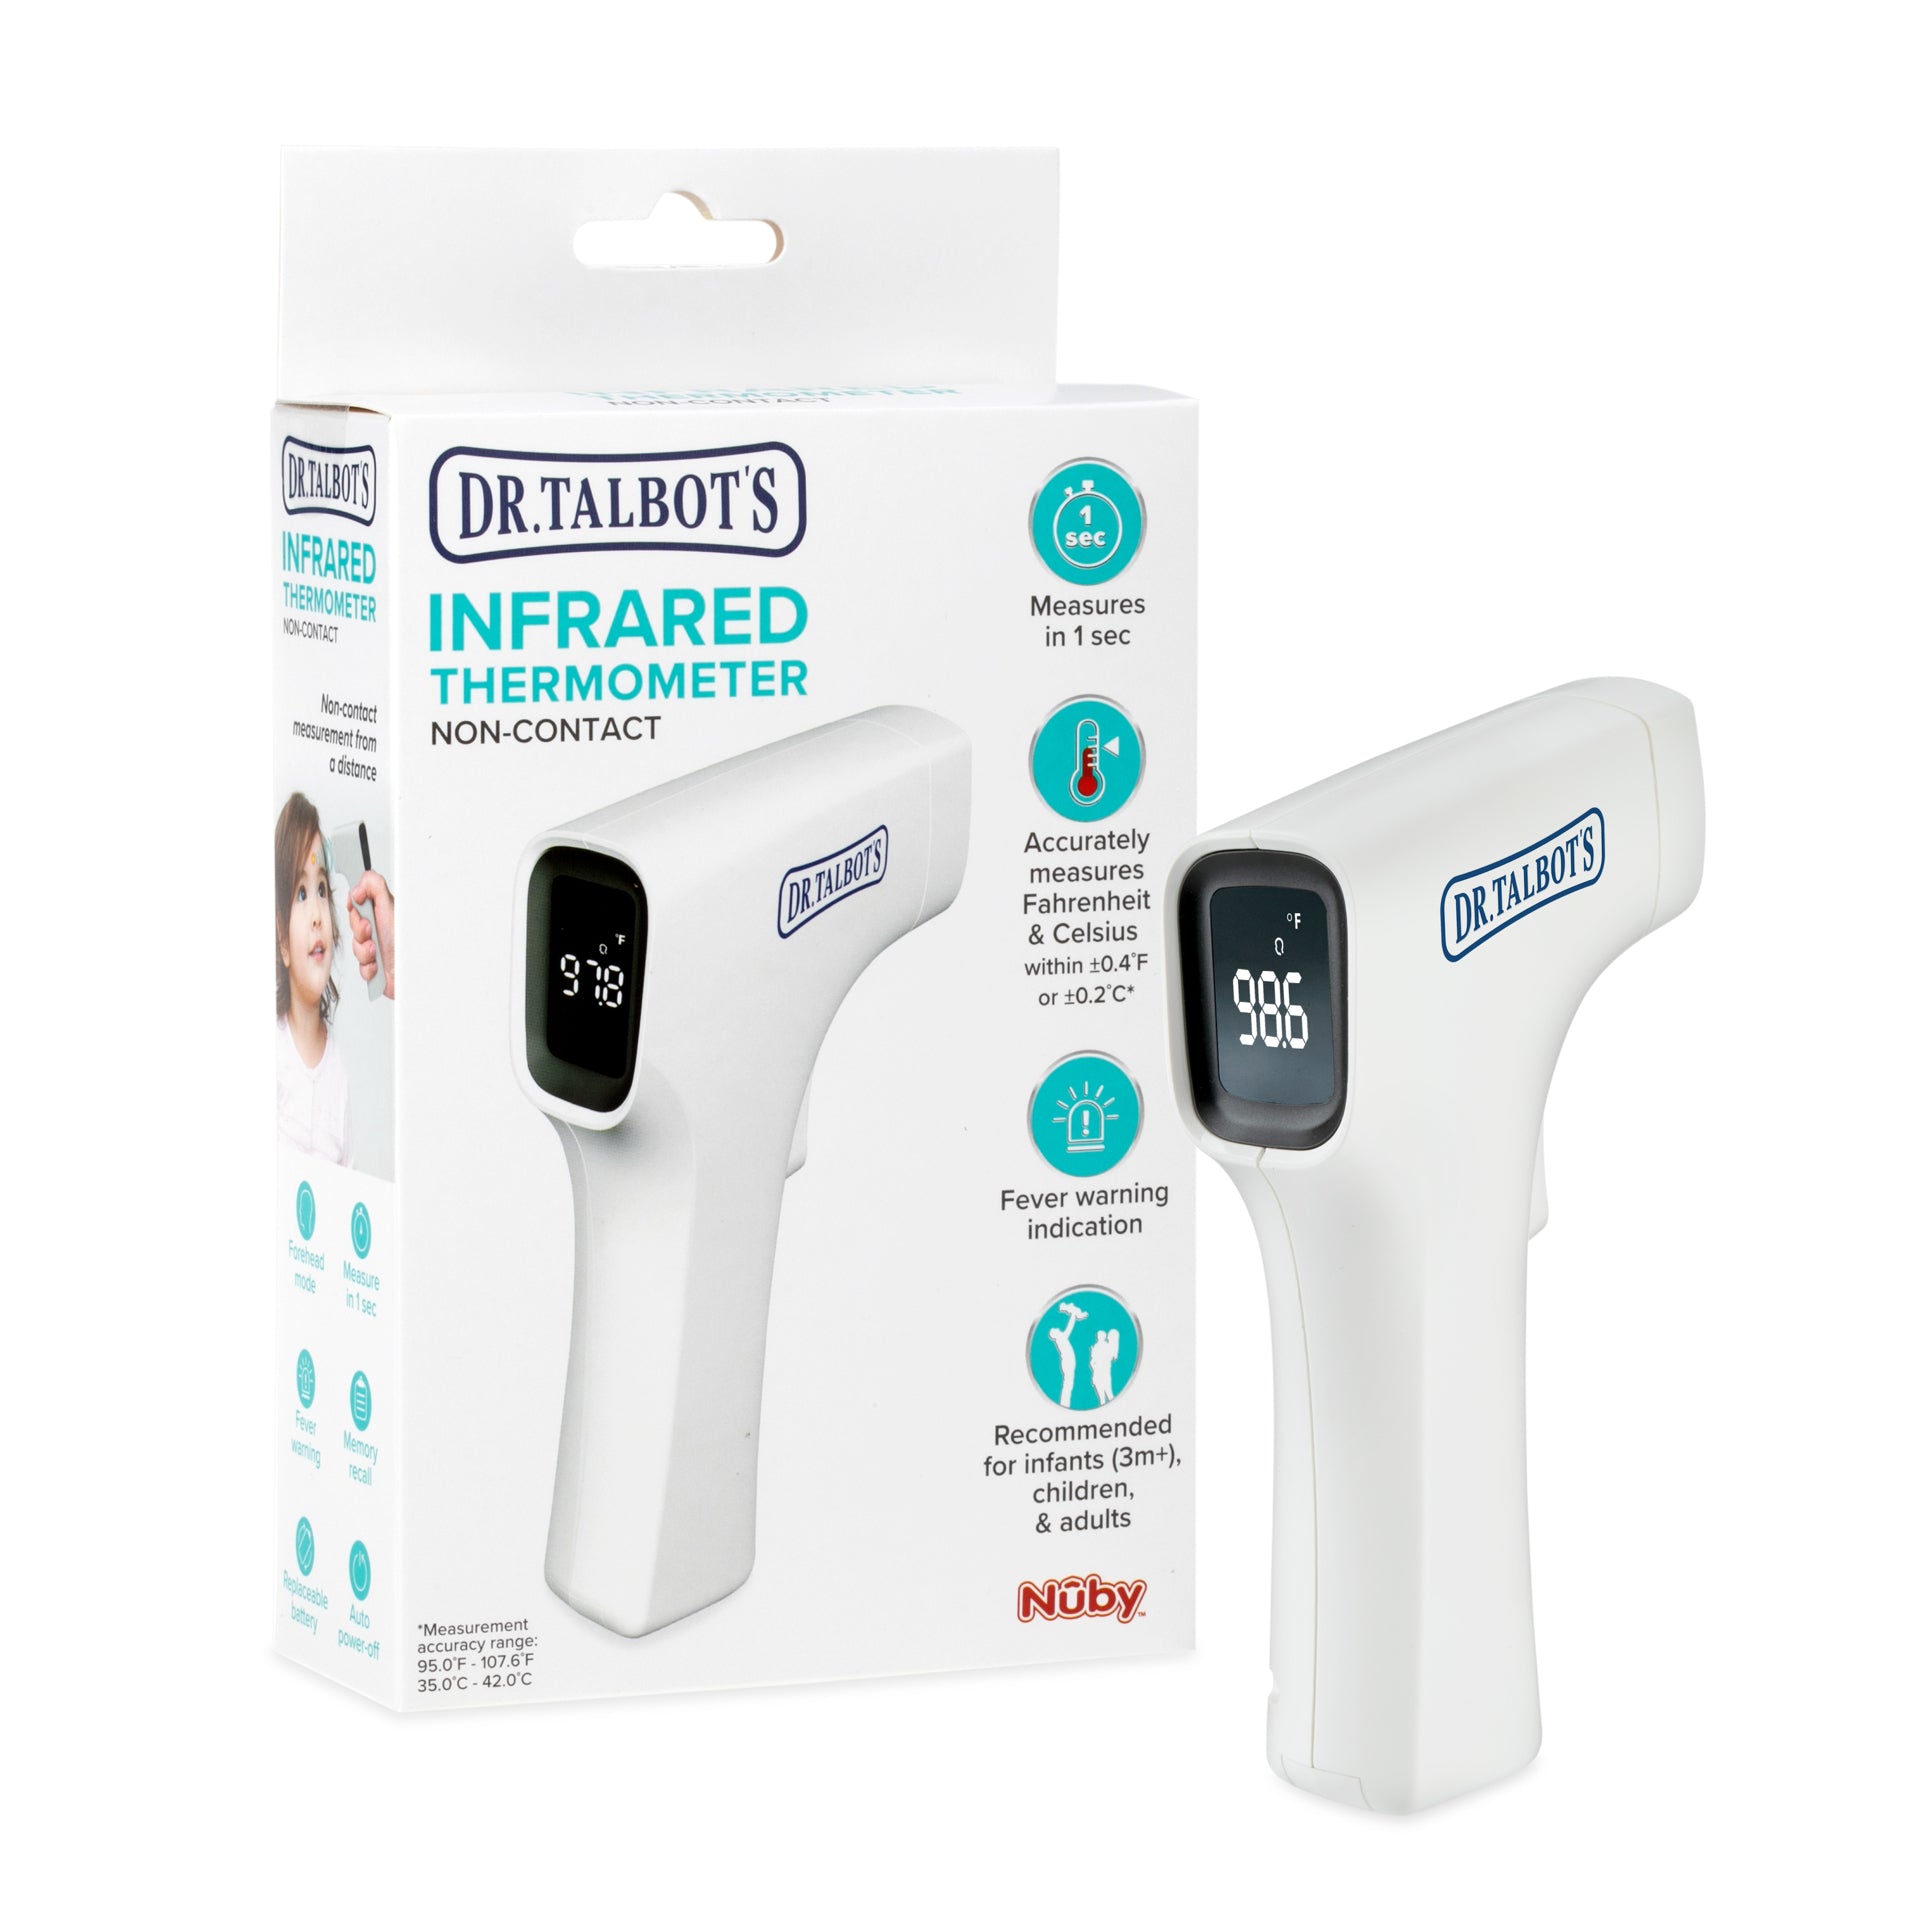 Eastwood Non-Contact Infrared Thermometer